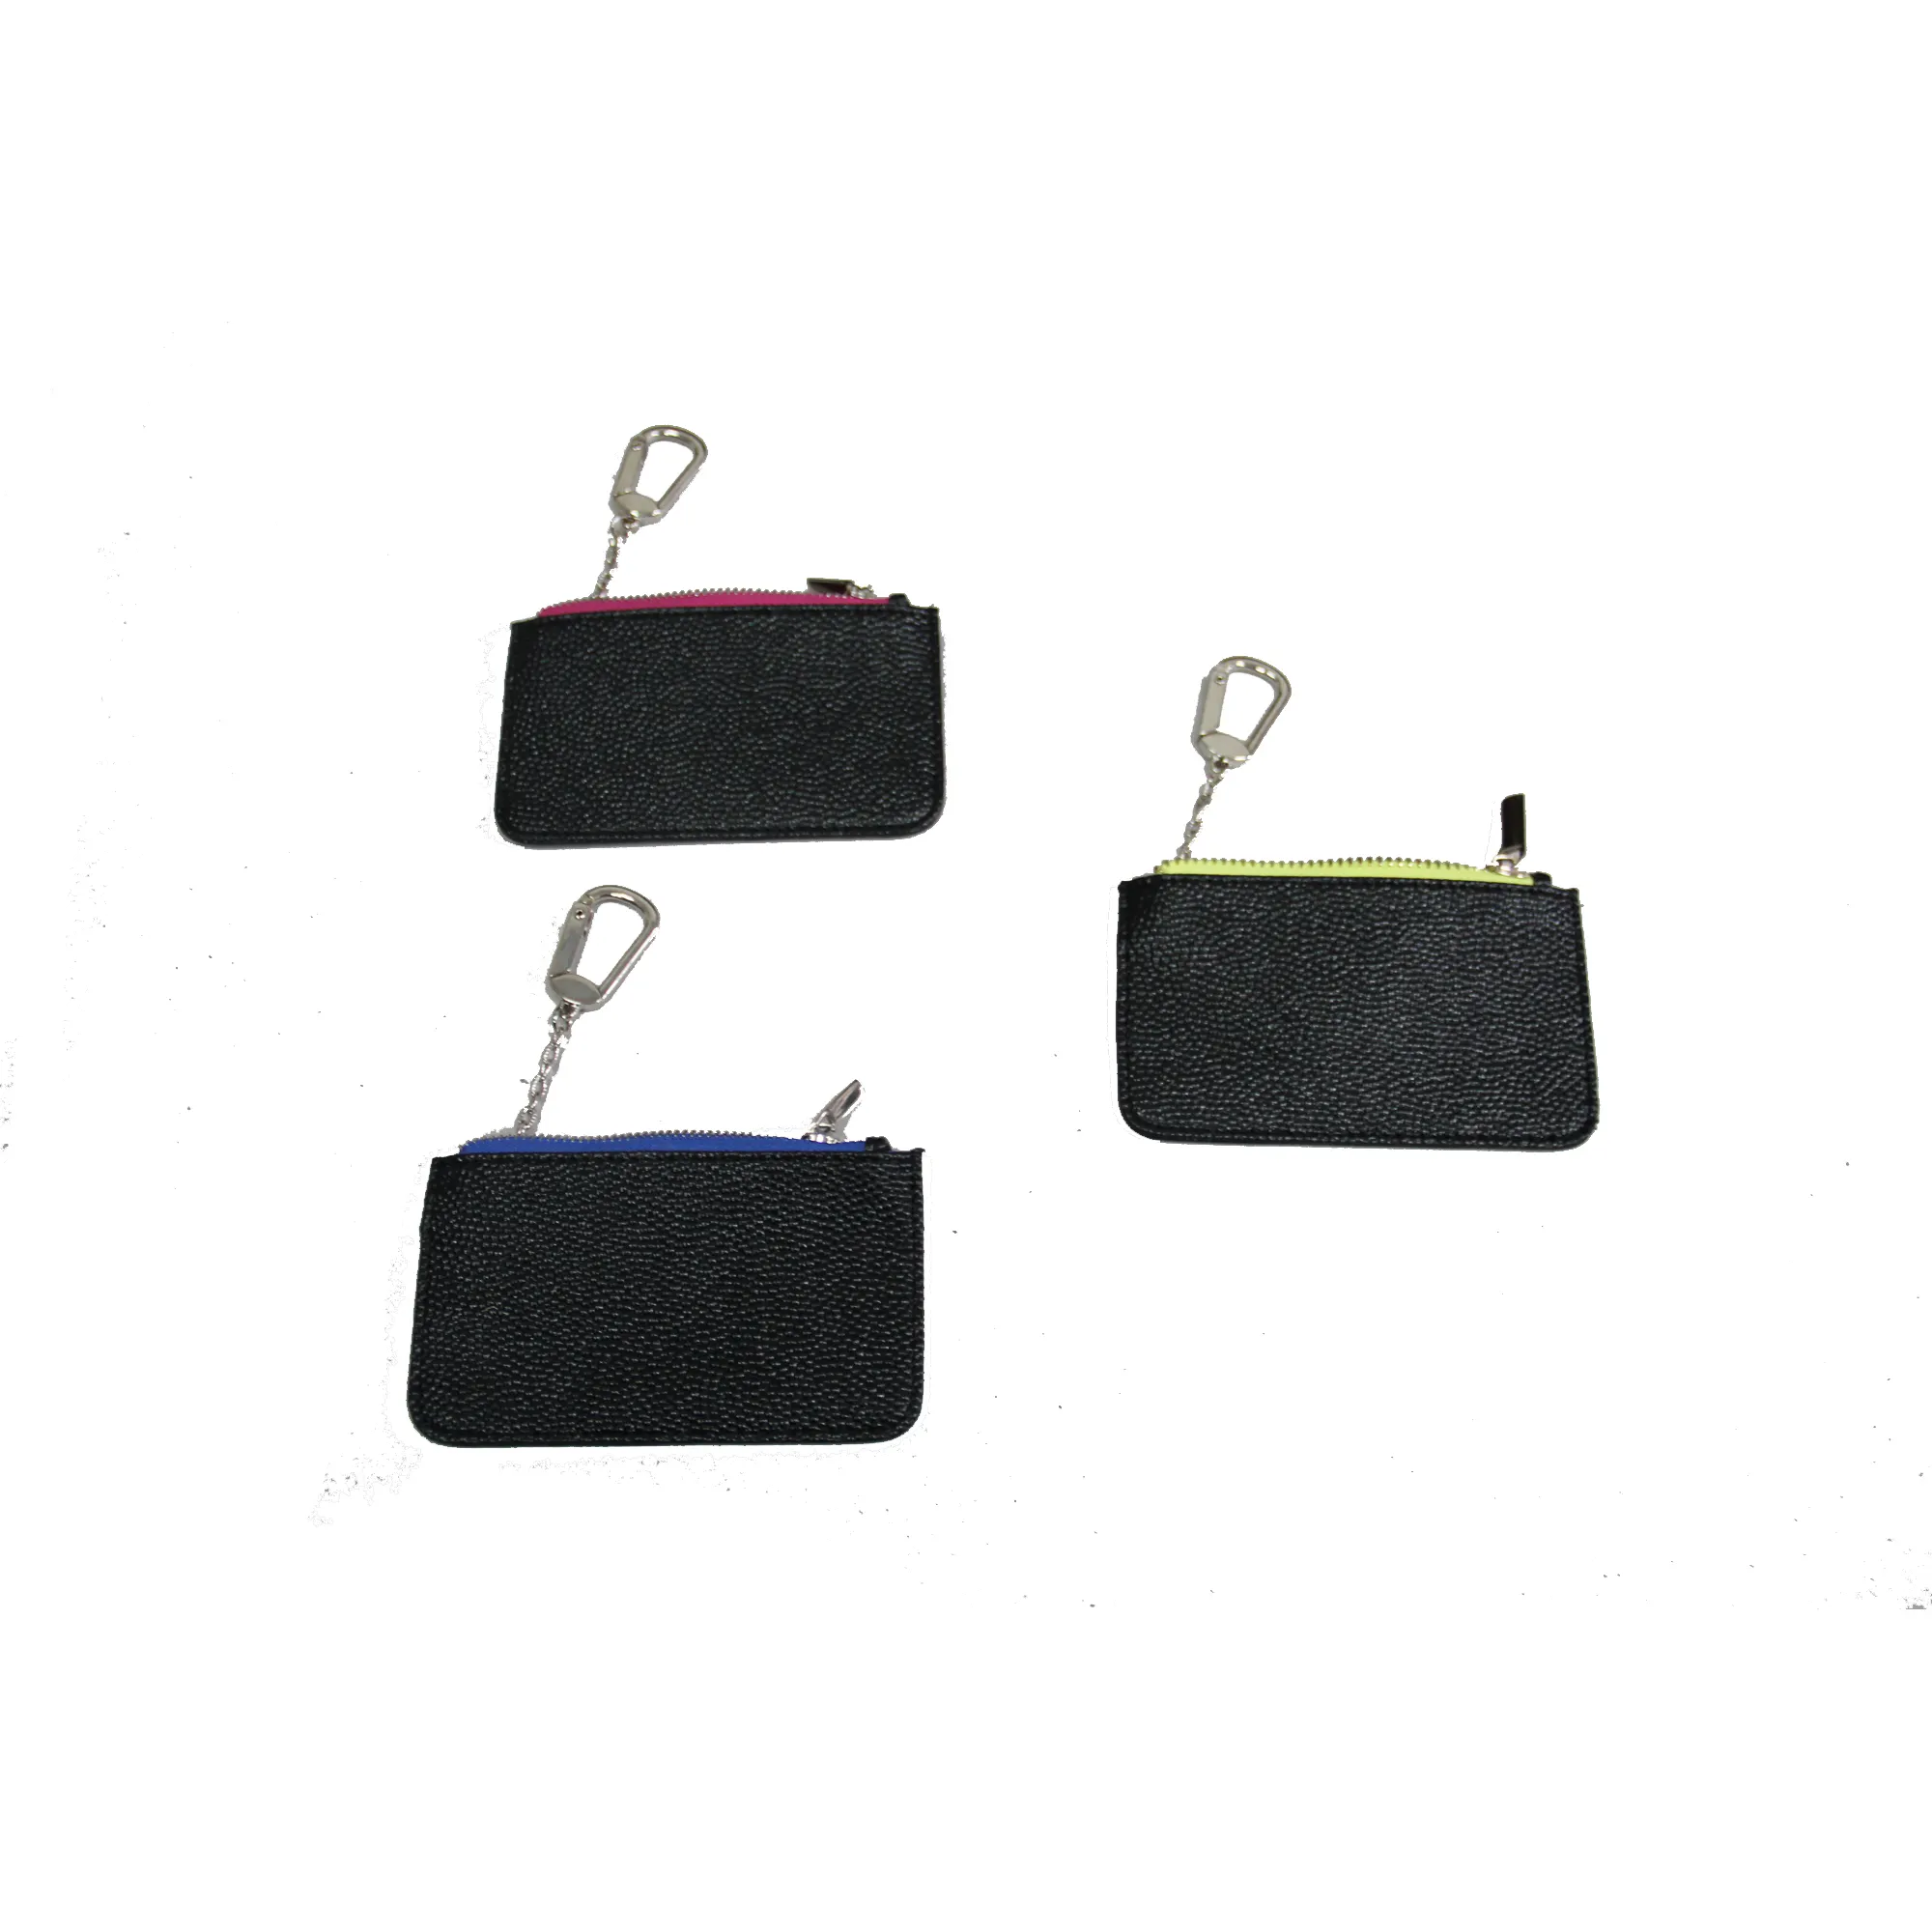 WomenのBlack Stingray PVC Leather Keychain Zipper Coin Pouch Wallet